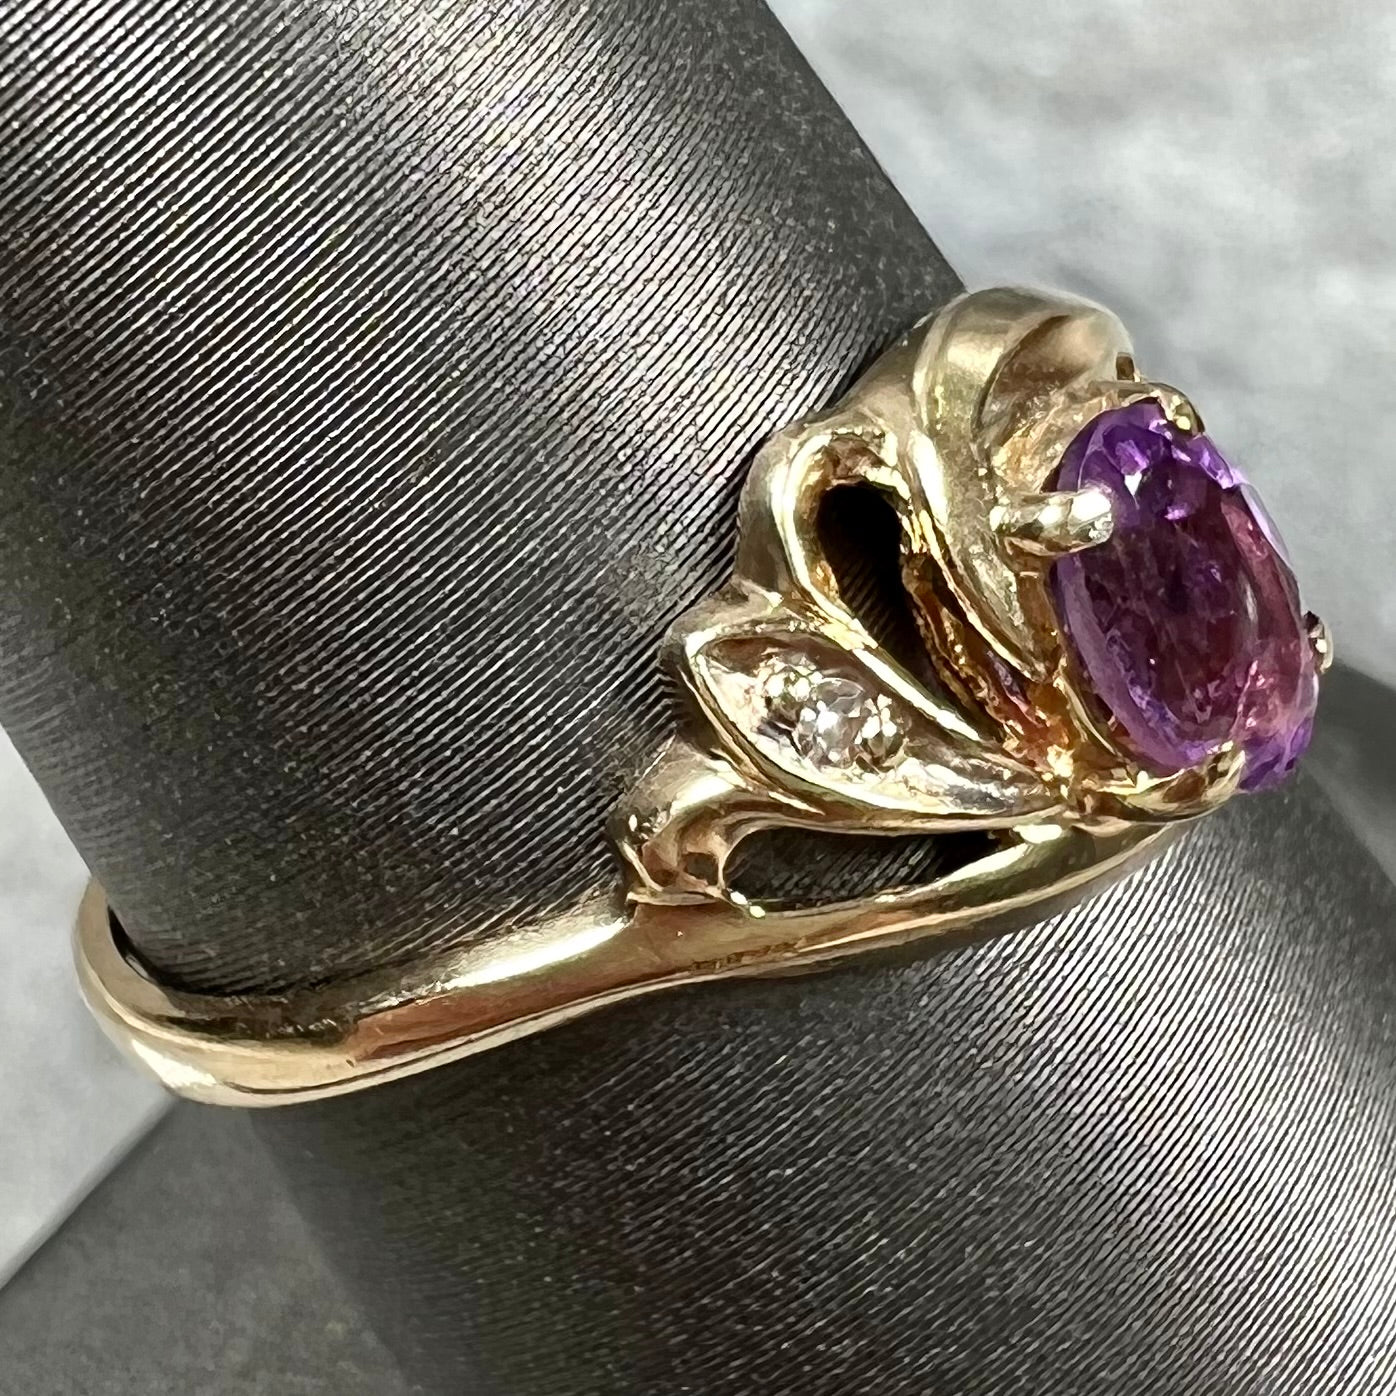 A yellow gold oval cut amethyst and diamond accent ladies' ring.